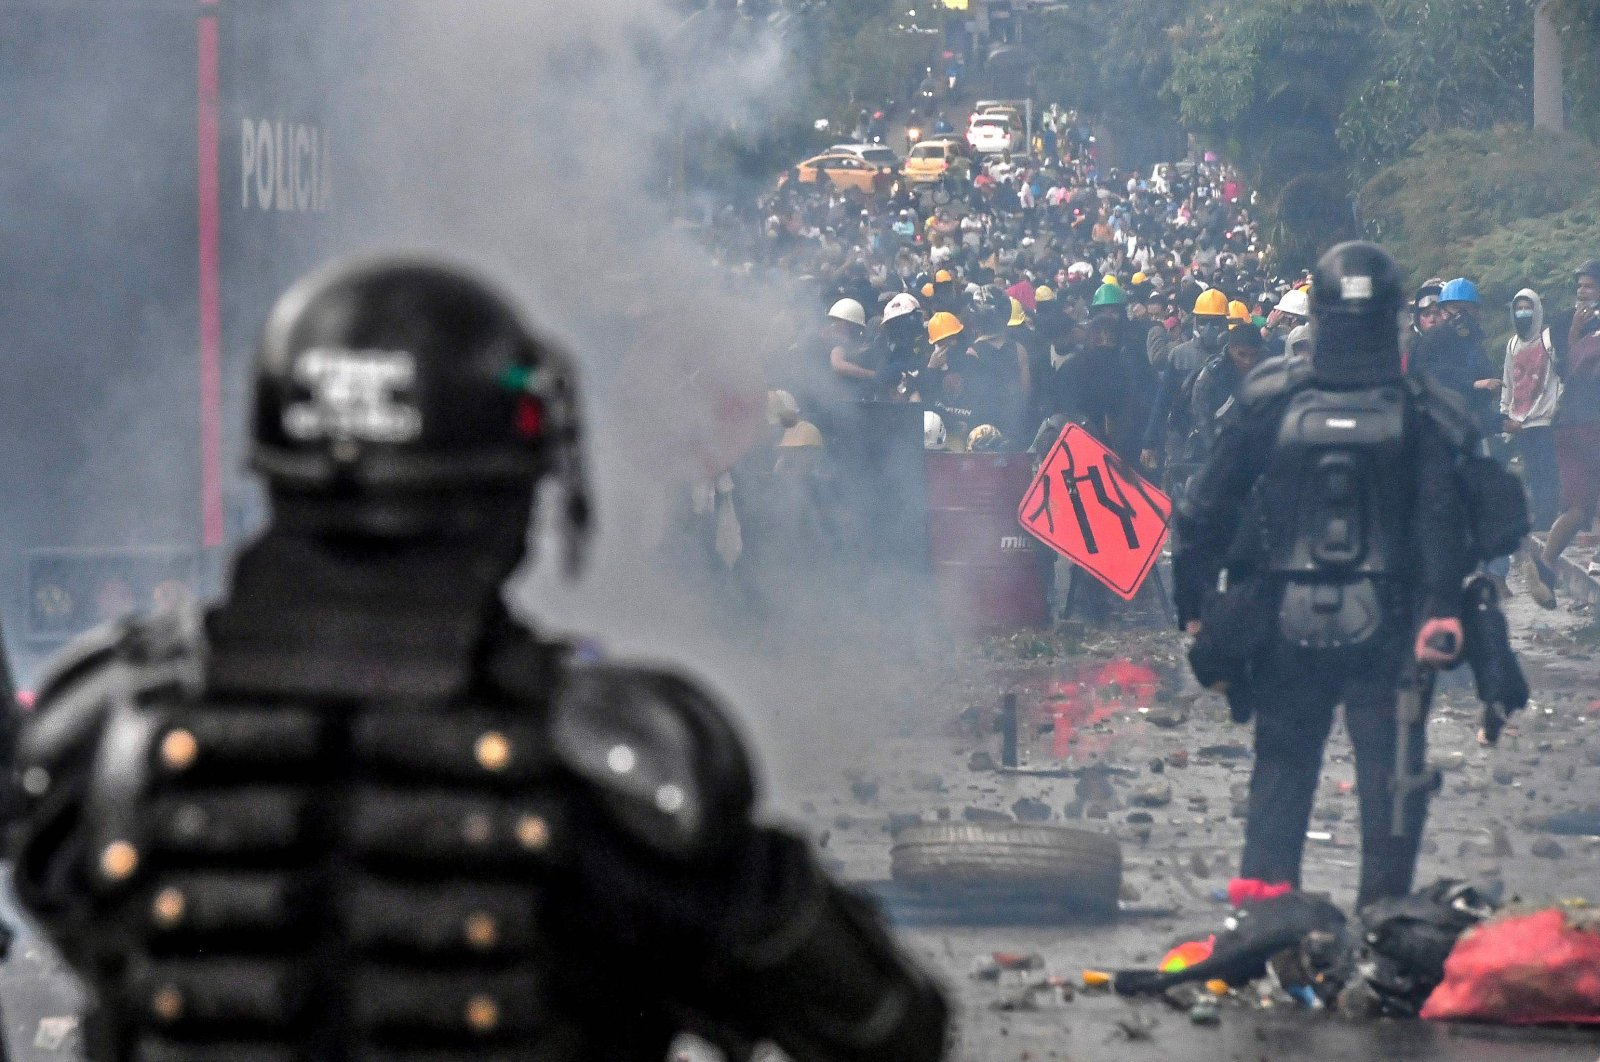 Riot police clash with demonstrators in a new protest against the government of Colombian President Ivan Duque in Medellin, Colombia, on June 2, 2021. (AFP Photo)